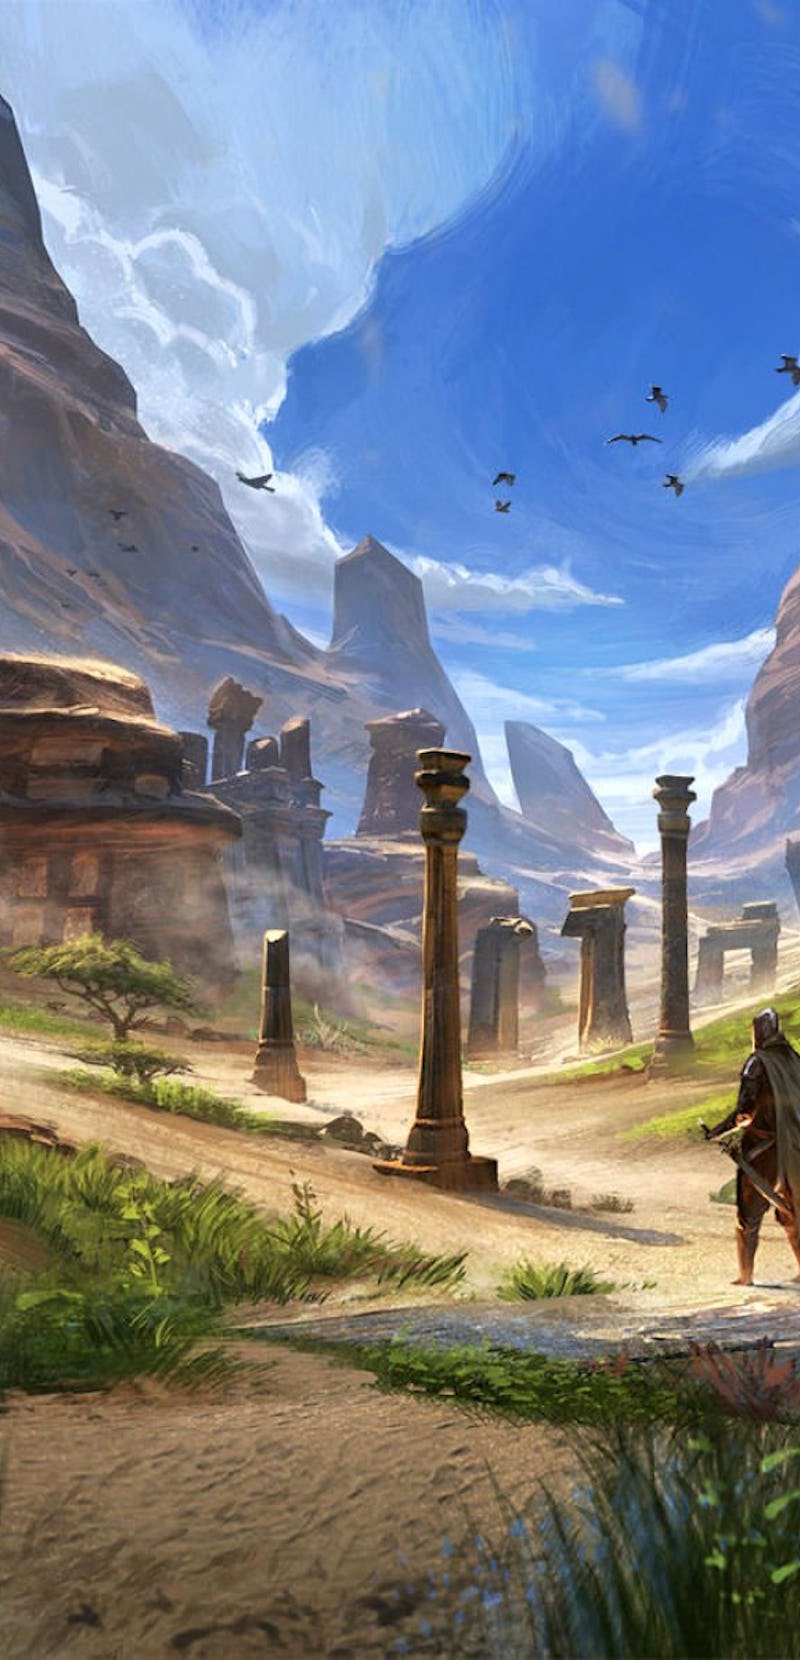 A still from a video landscape with hills and ruins from the game 'The Elder Scrolls'